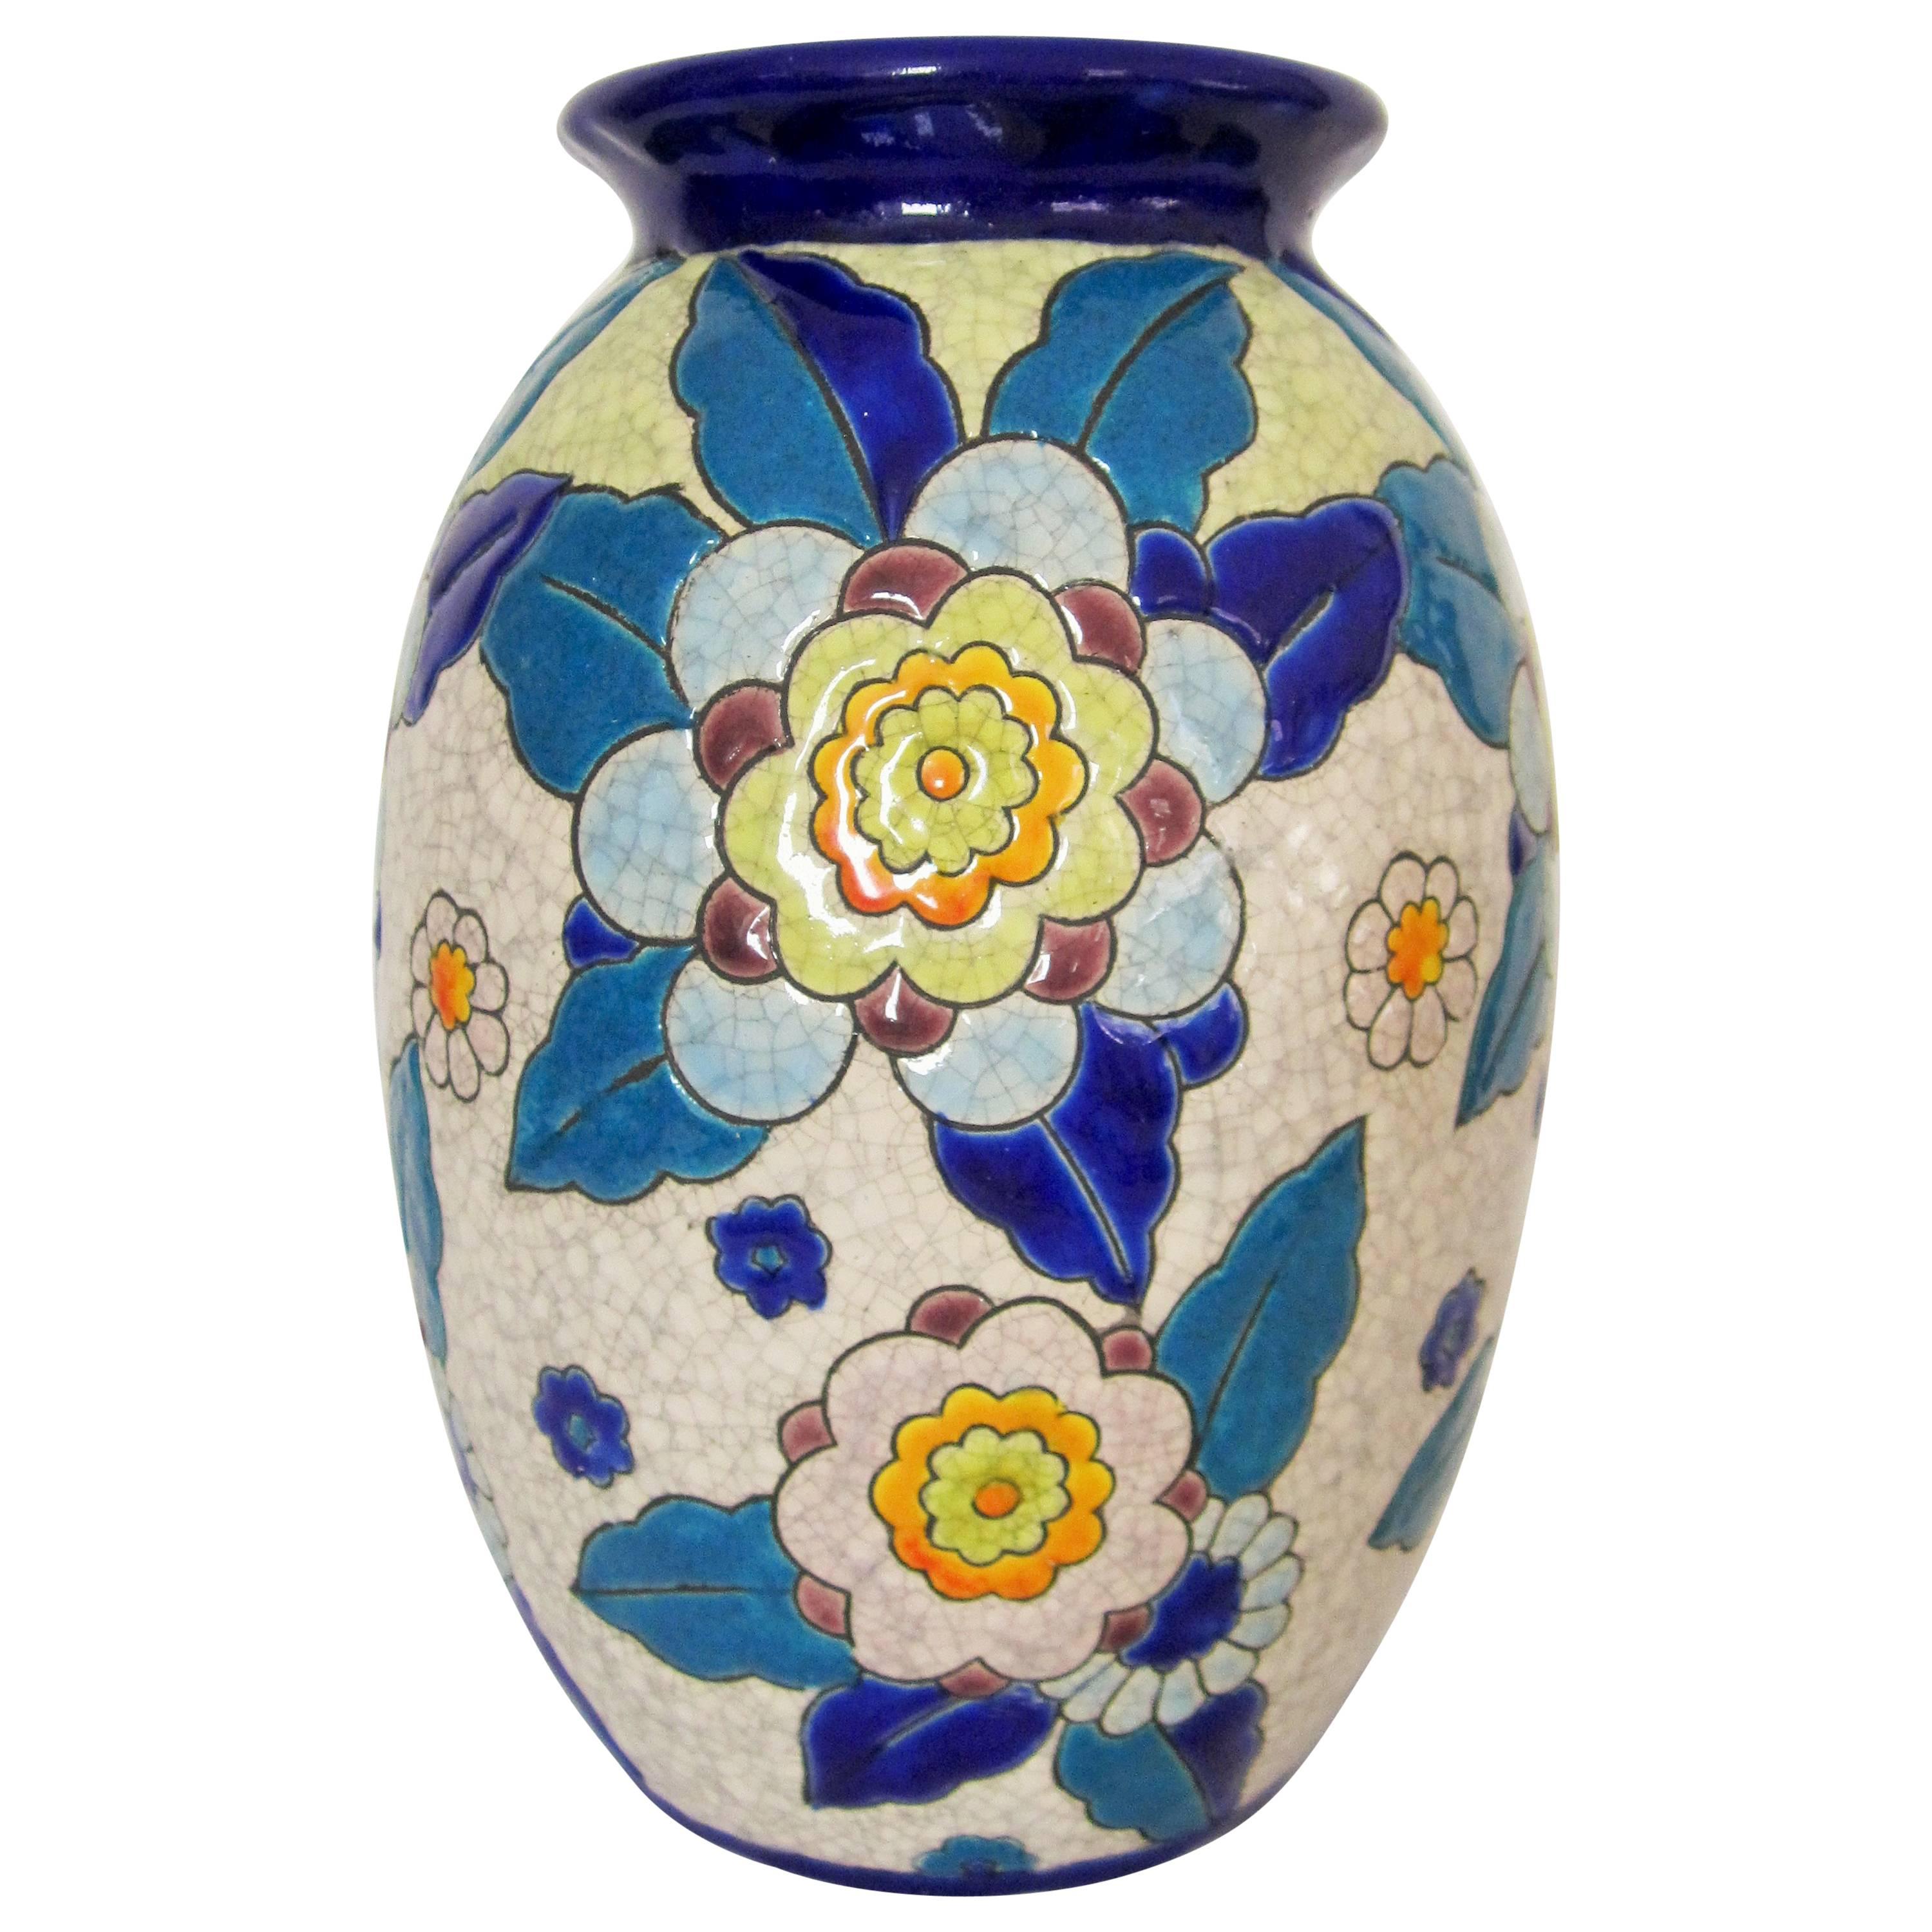 Midcentury Floral Pottery Vase in the Style of Boch Freres, Belgium